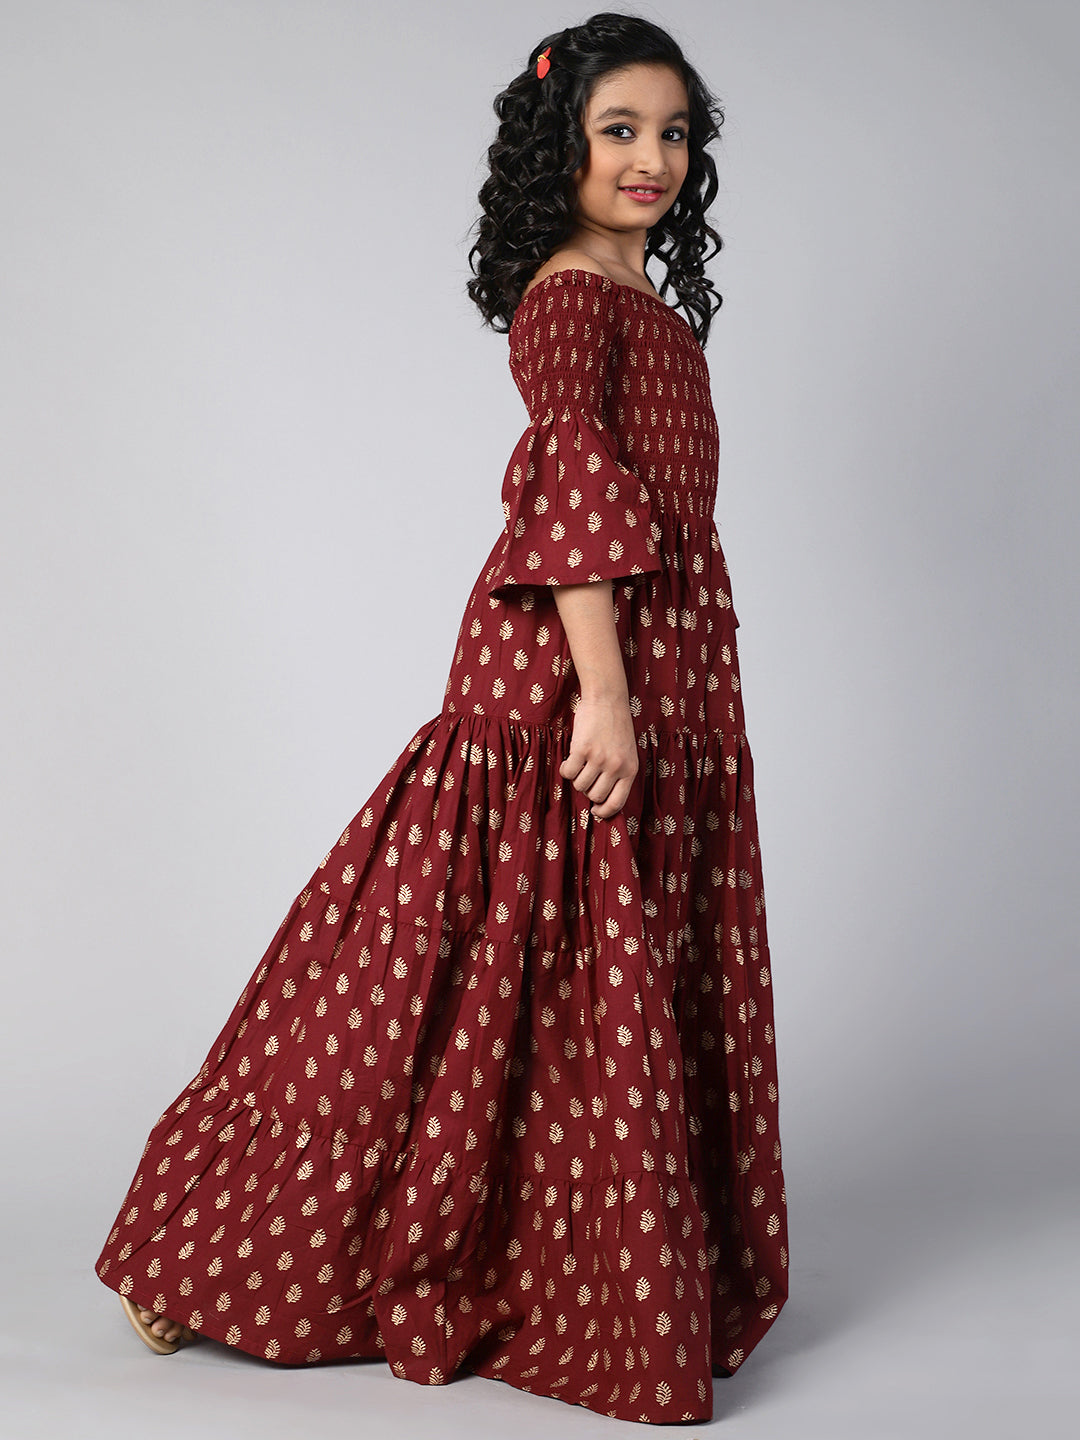 Maroon Gold Printed Off Shoulder Tiered Dress